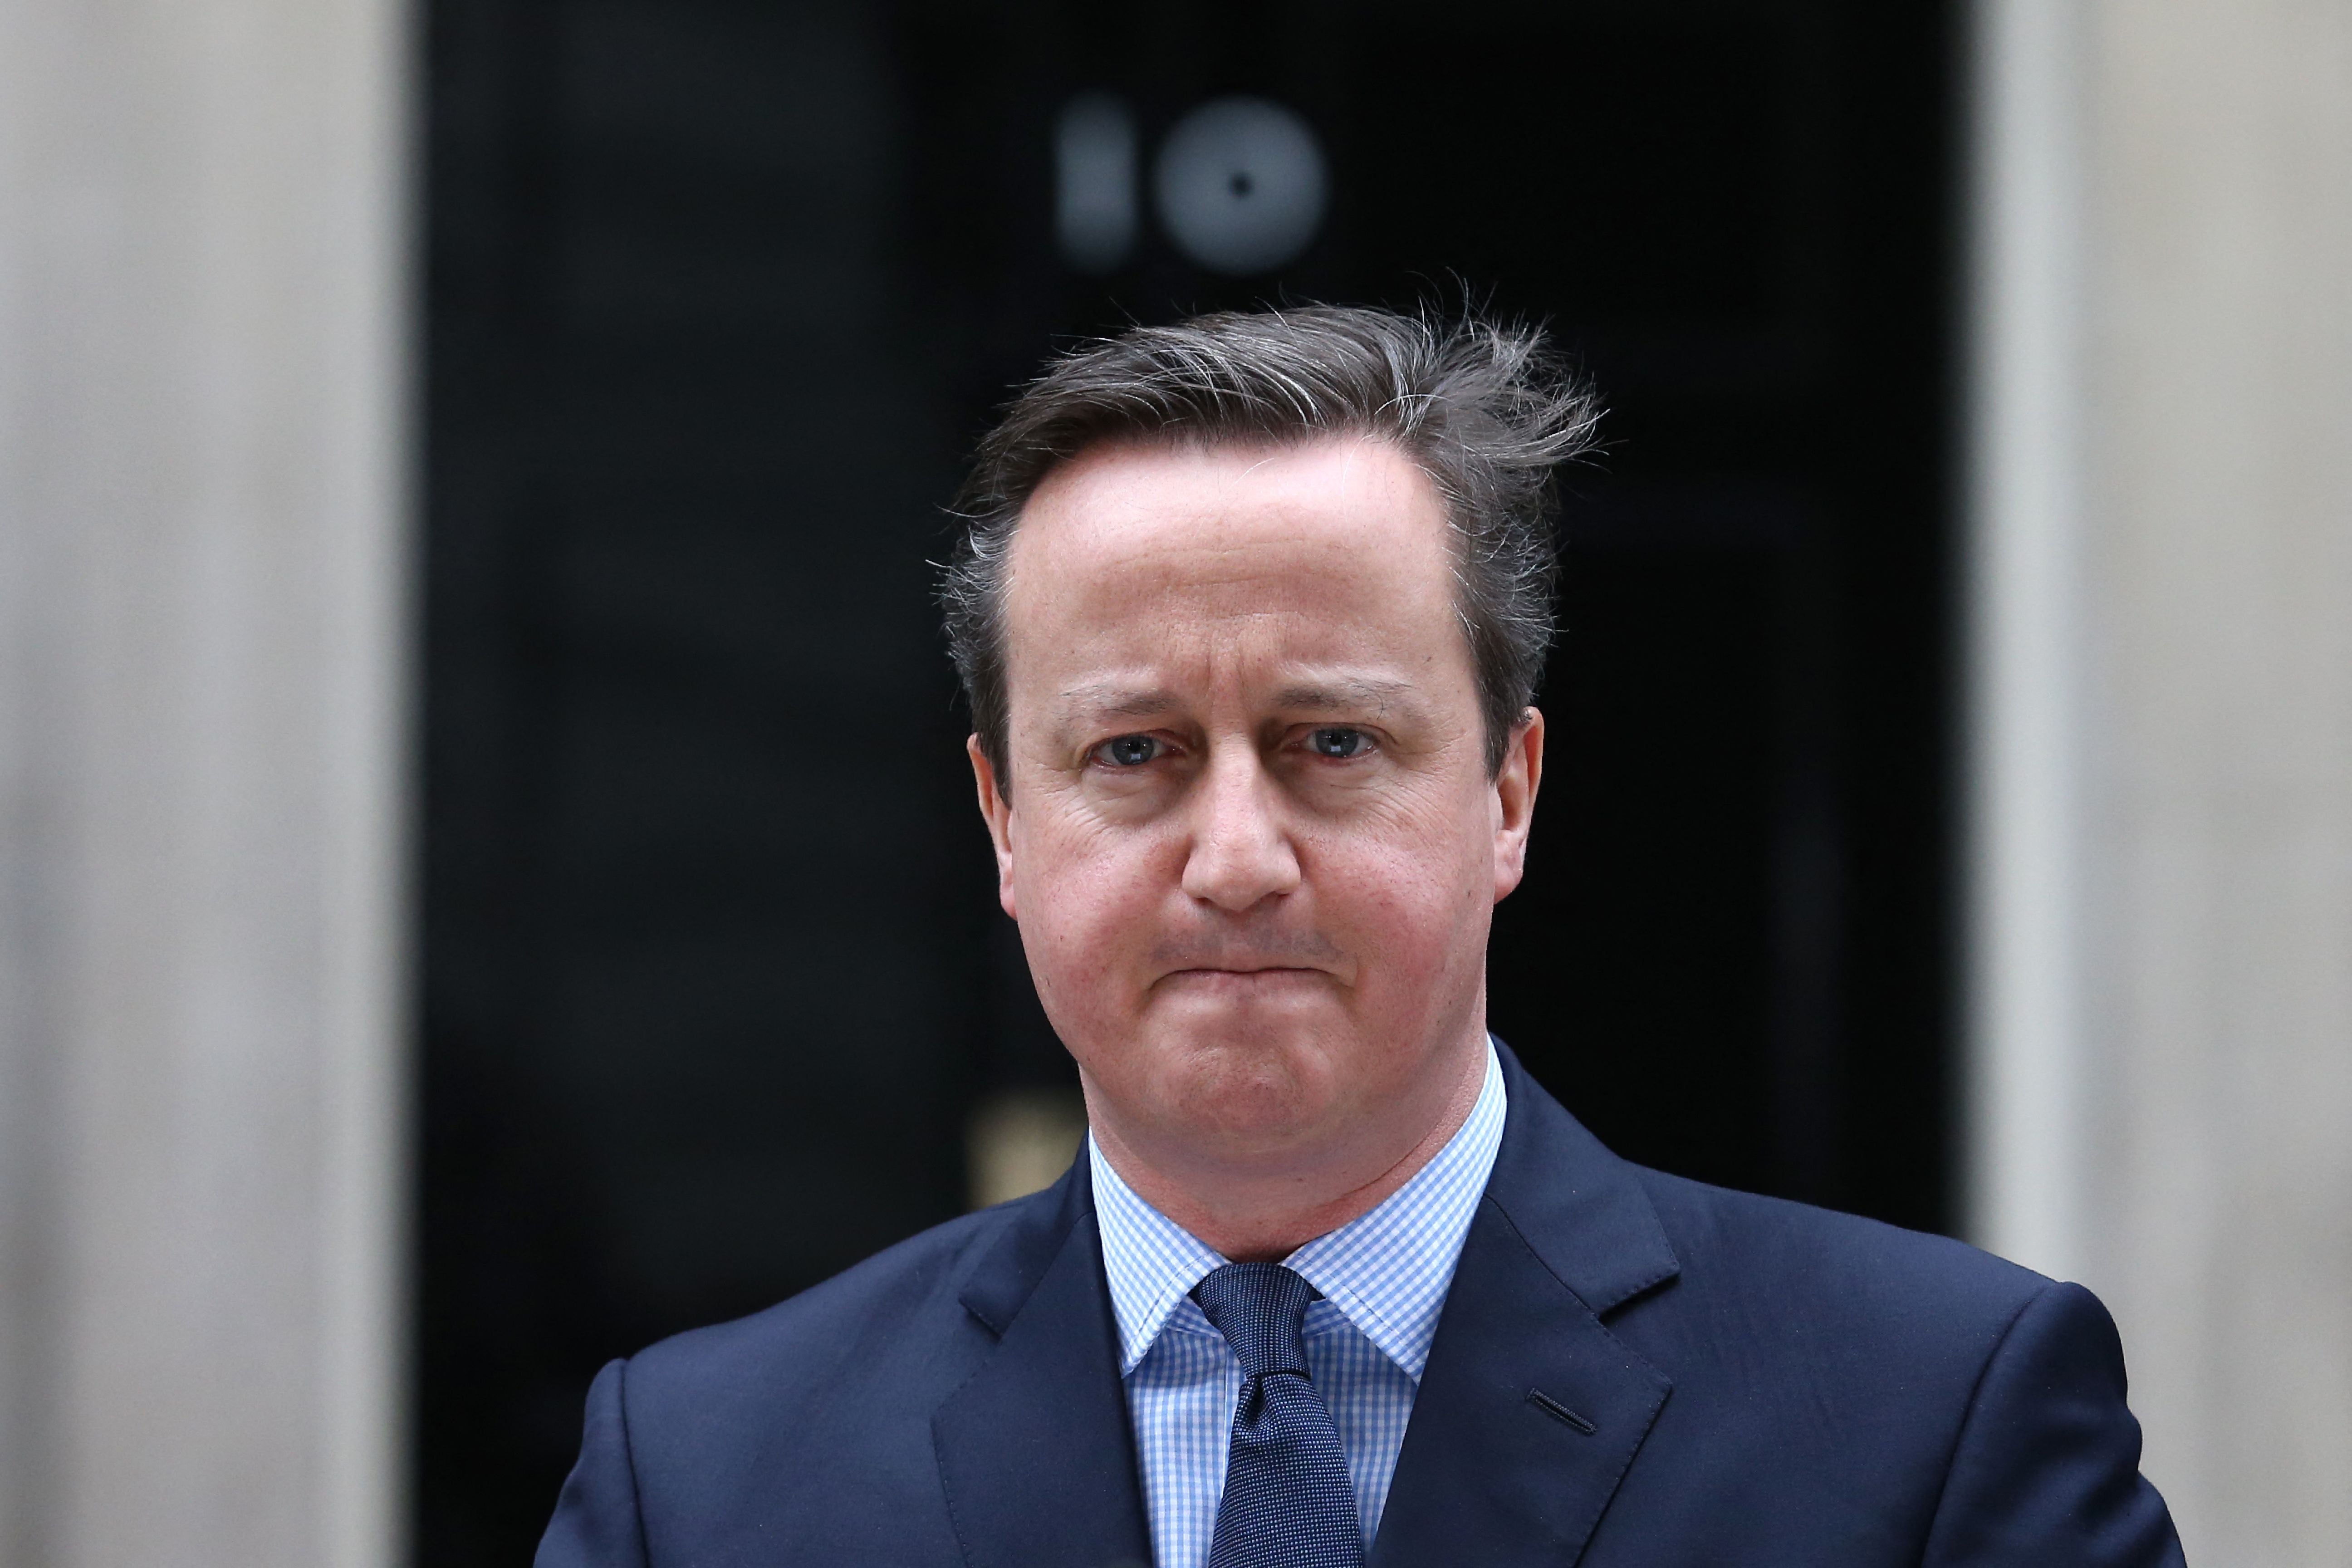 David Cameron set up the National Citizen Service in 2011